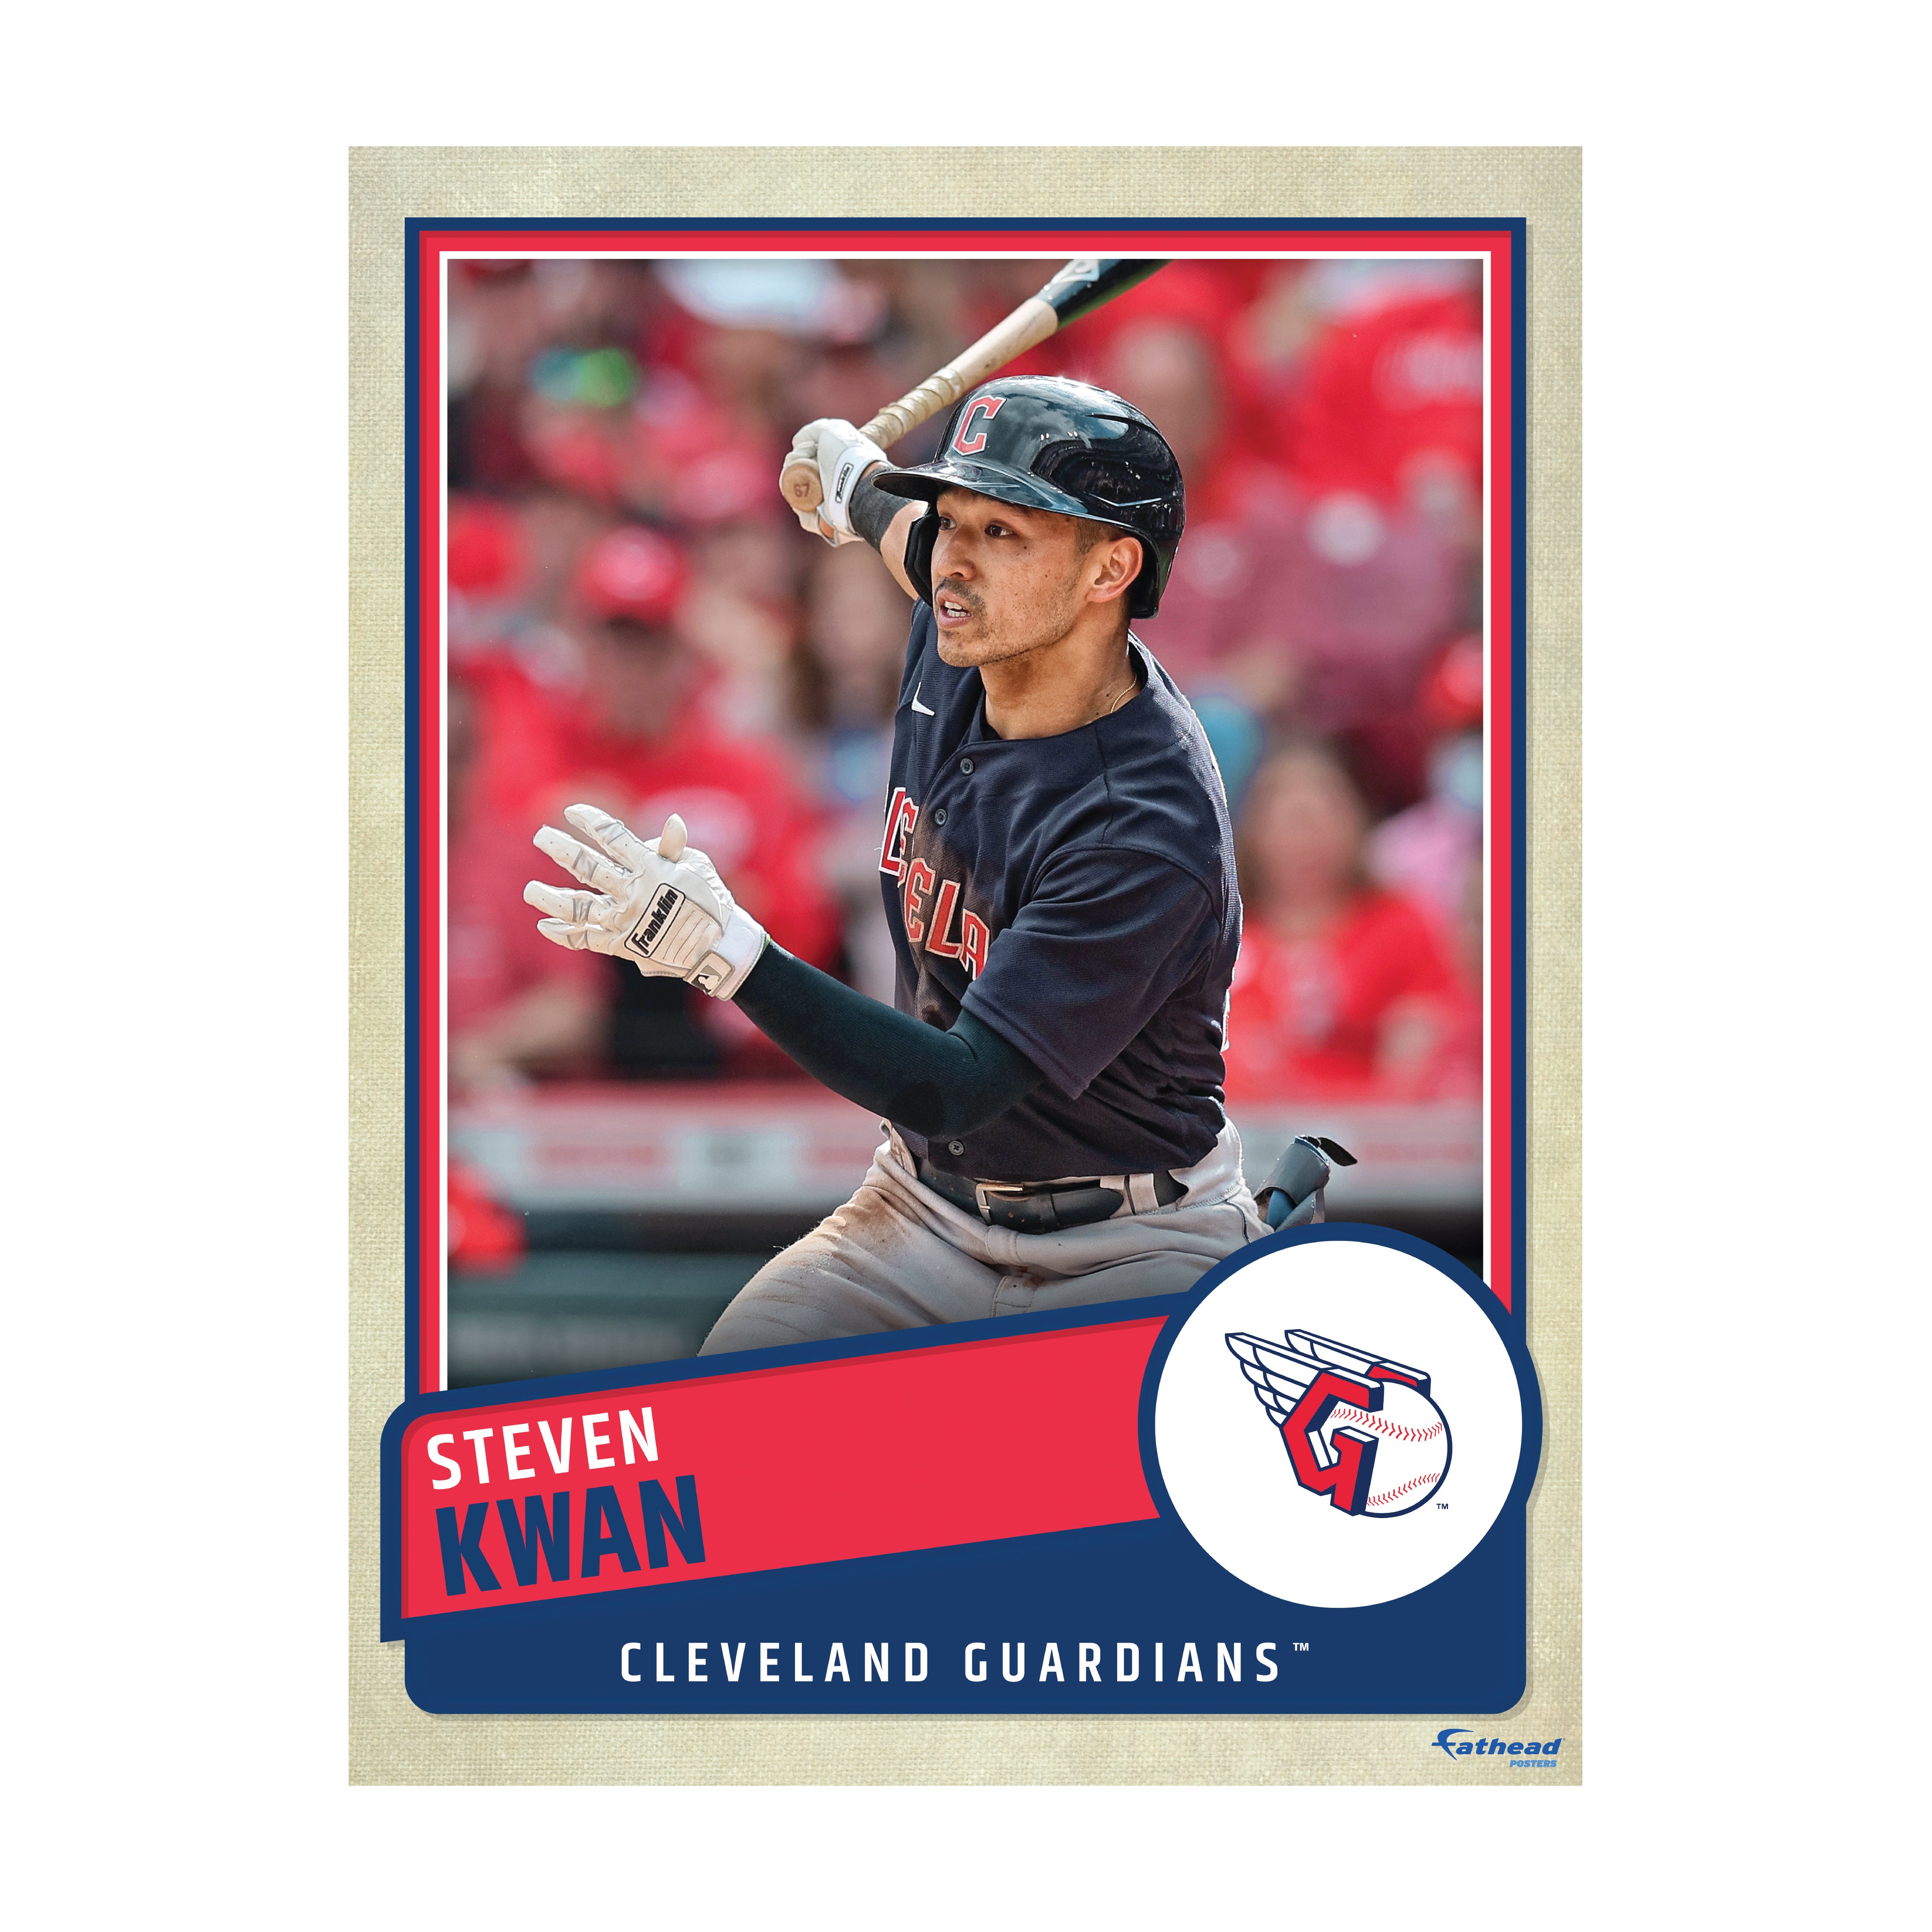 Cleveland Guardians: Steven Kwan 2022 Poster - Officially Licensed MLB